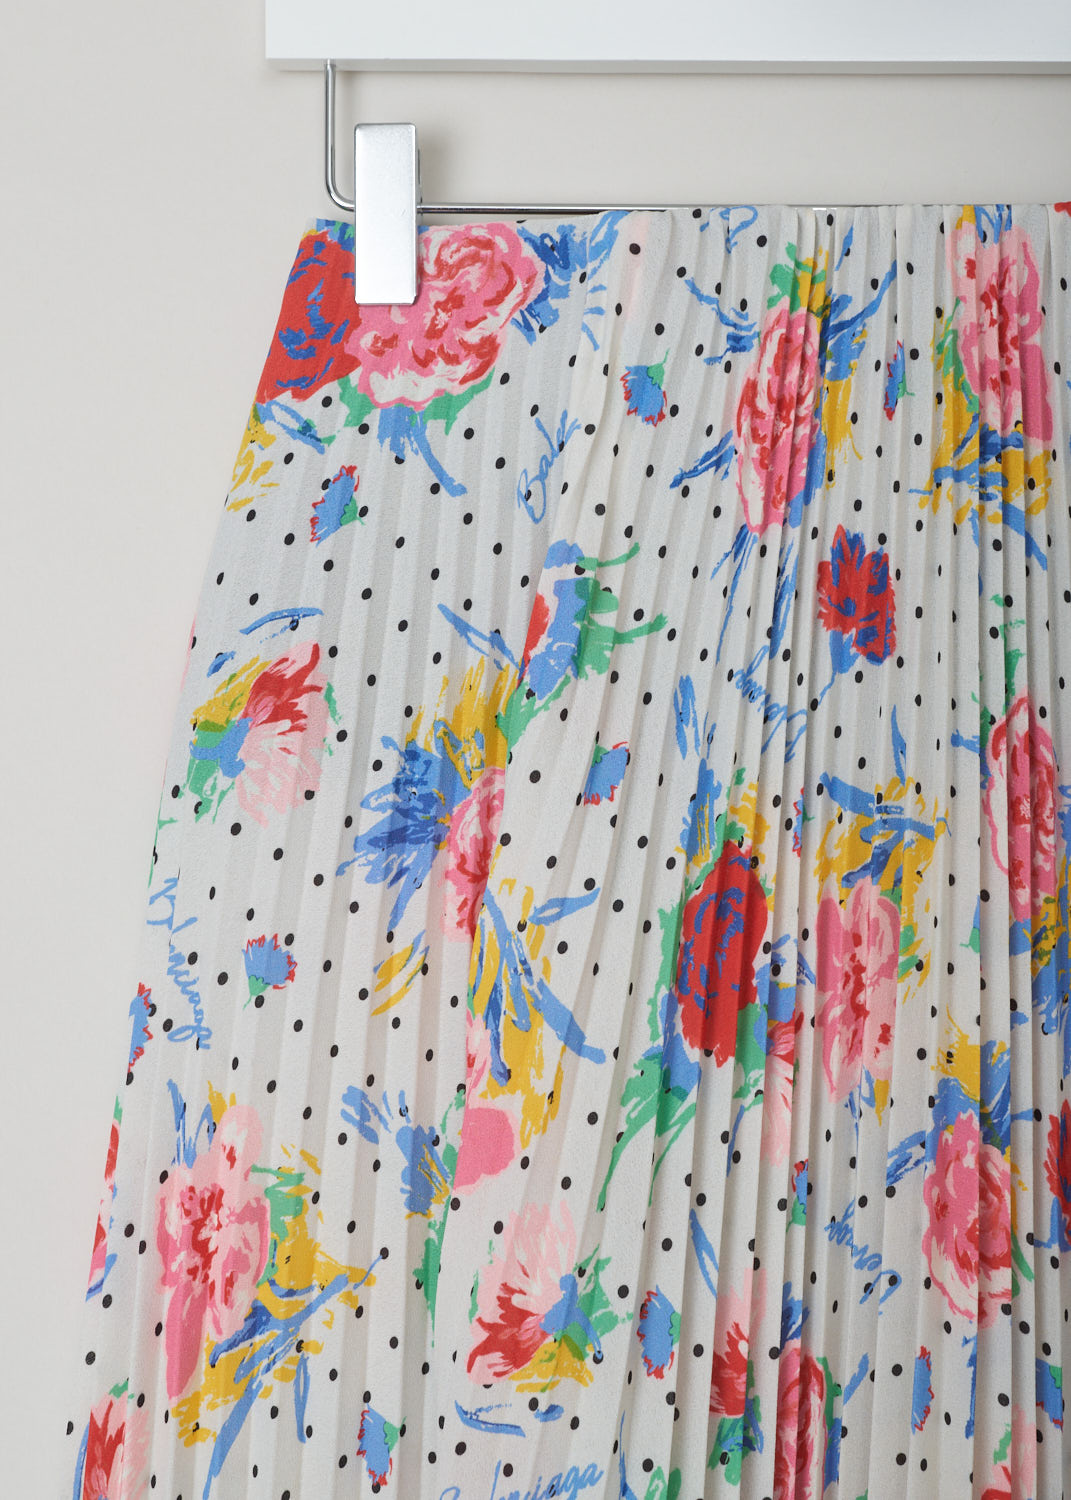 Balenciaga, Polka dot floral plissé skirt, 601169_THL07_9701, white red yellow green blue, detail. This high-waisted multi-colored plissé skirt comes with a floral design pattern and polka dots through-out. The closure options on this piece are 2 metal hooks and beneath that a concealed zipper.